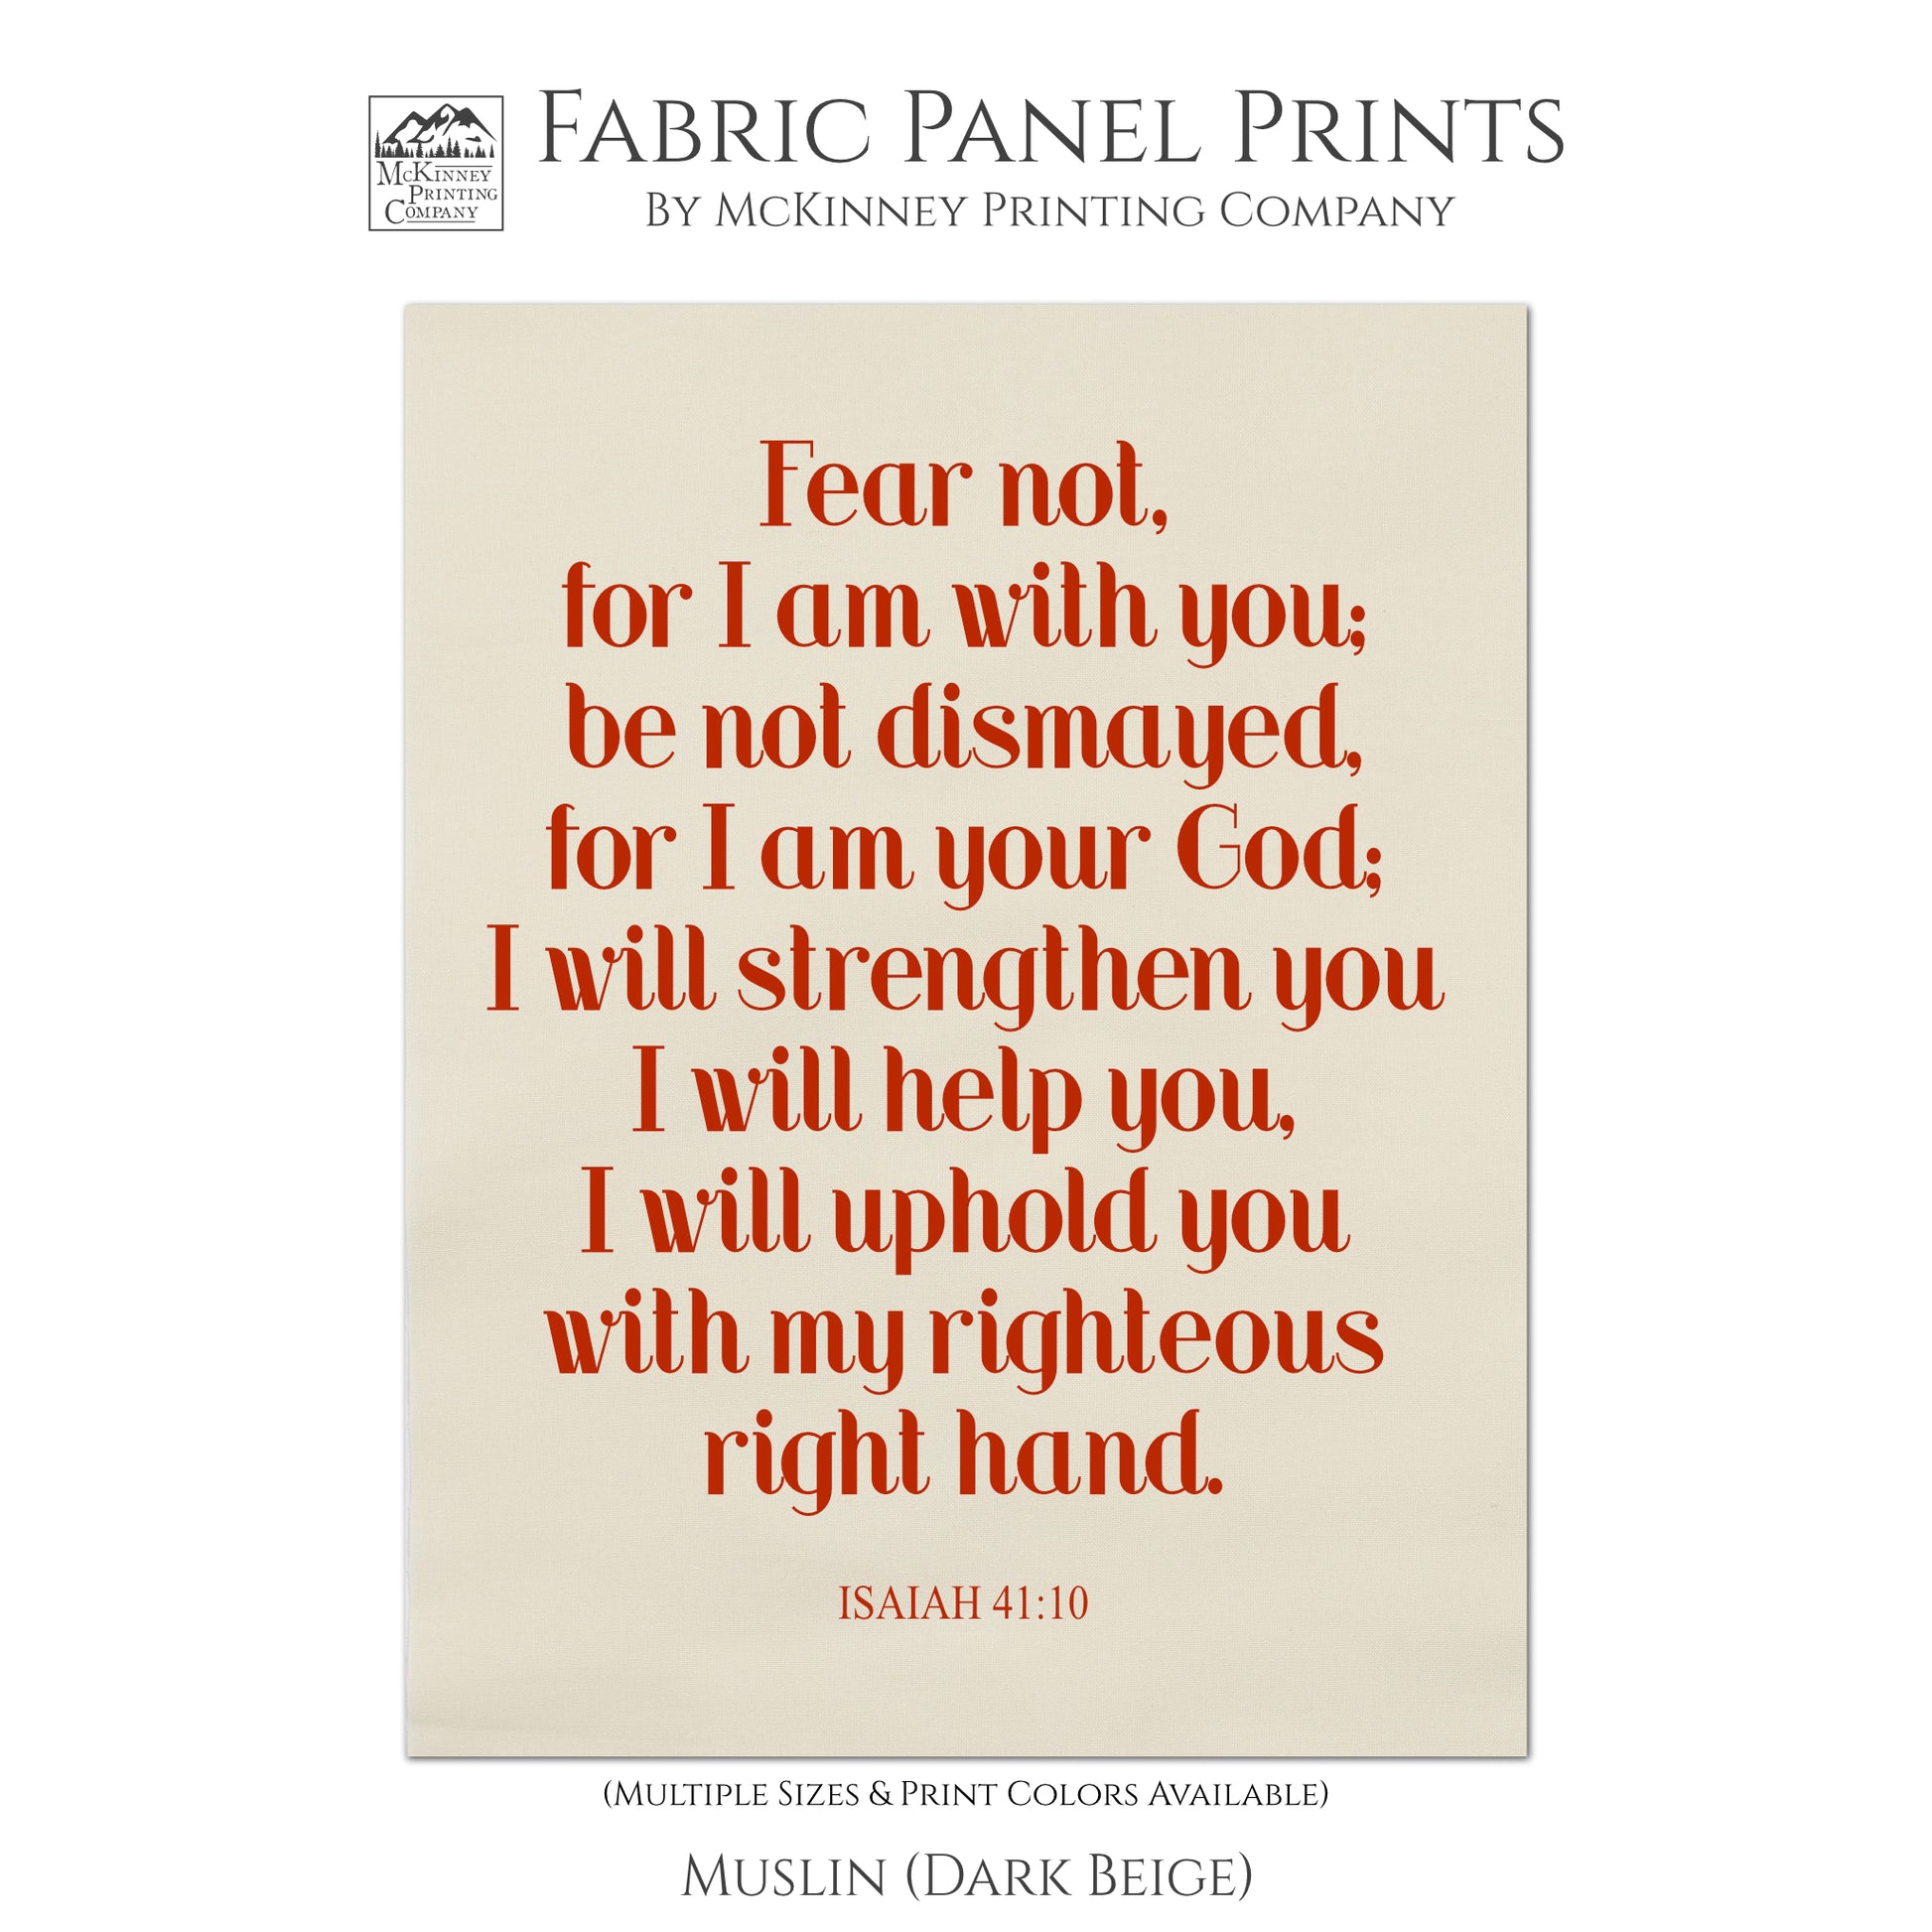 Fear not, for I am with you; be not dismayed, for I am your God; I will strengthen you, I will help you, I will uphold you with my righteous right hand. - Isaiah 41:10 - Fabric Panel Print - Quilt Block Fabric, Muslin